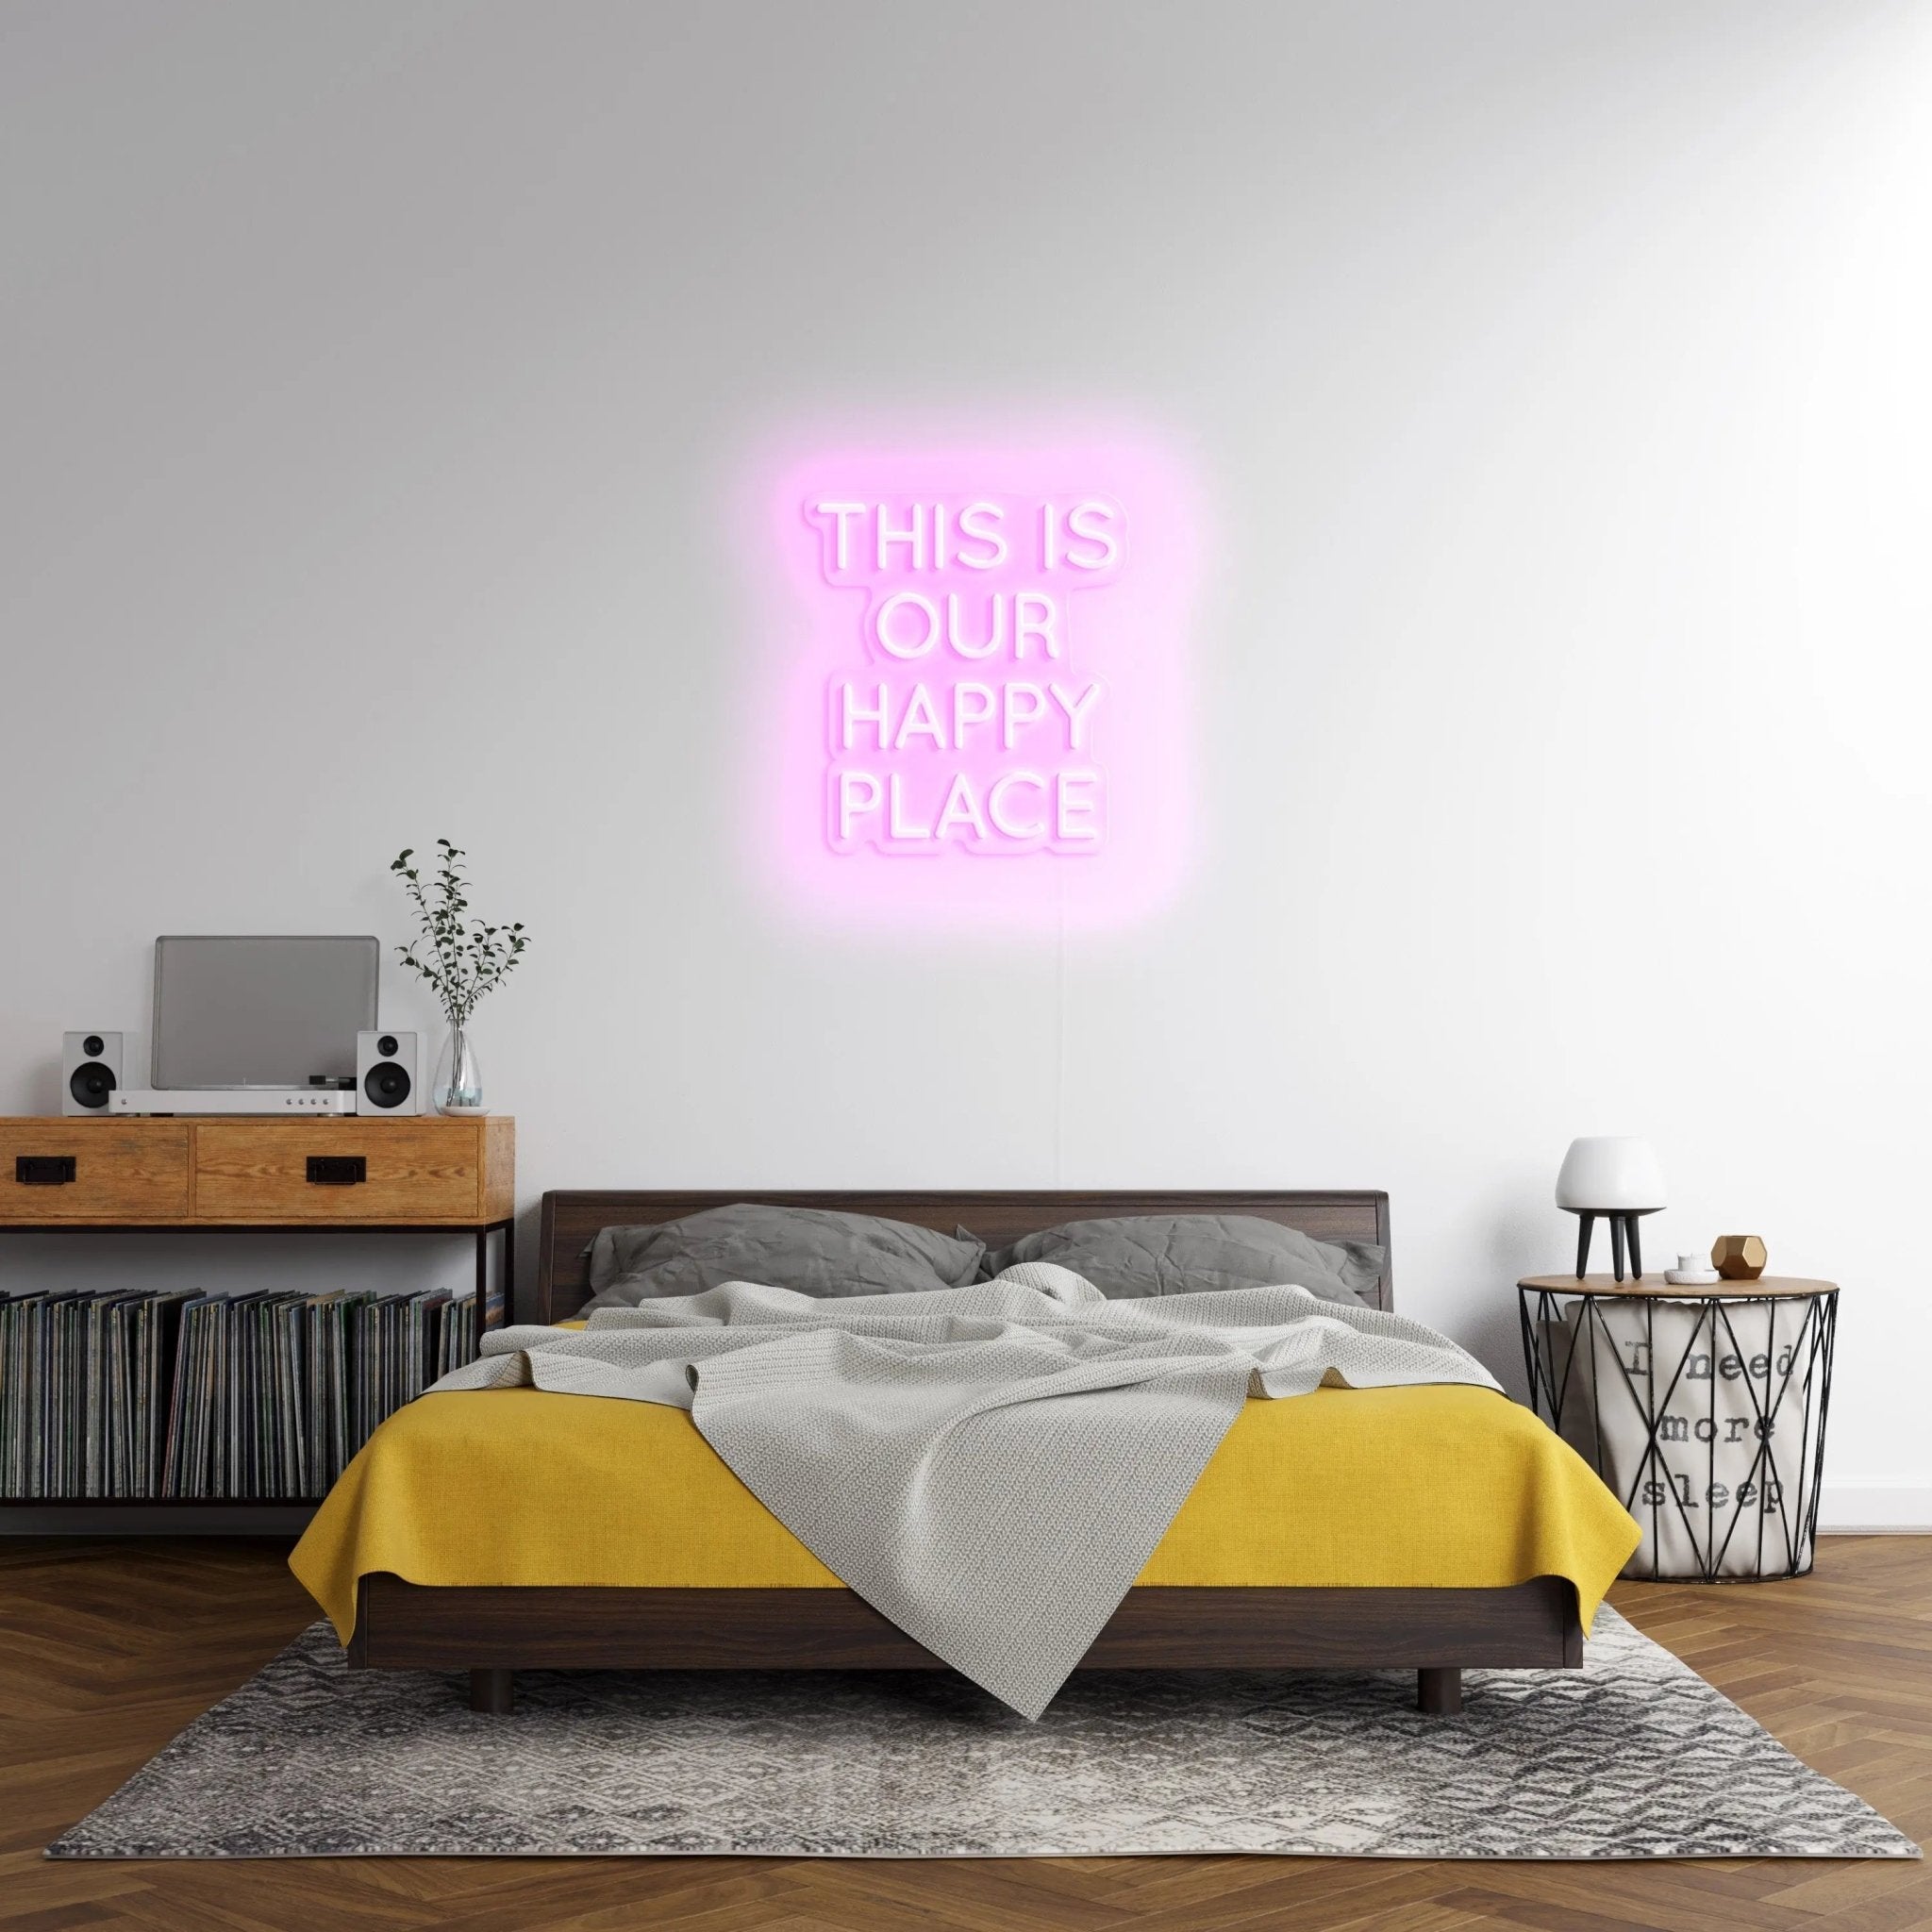 'This Is Our Happy Place' LED Neon Sign - neonaffair